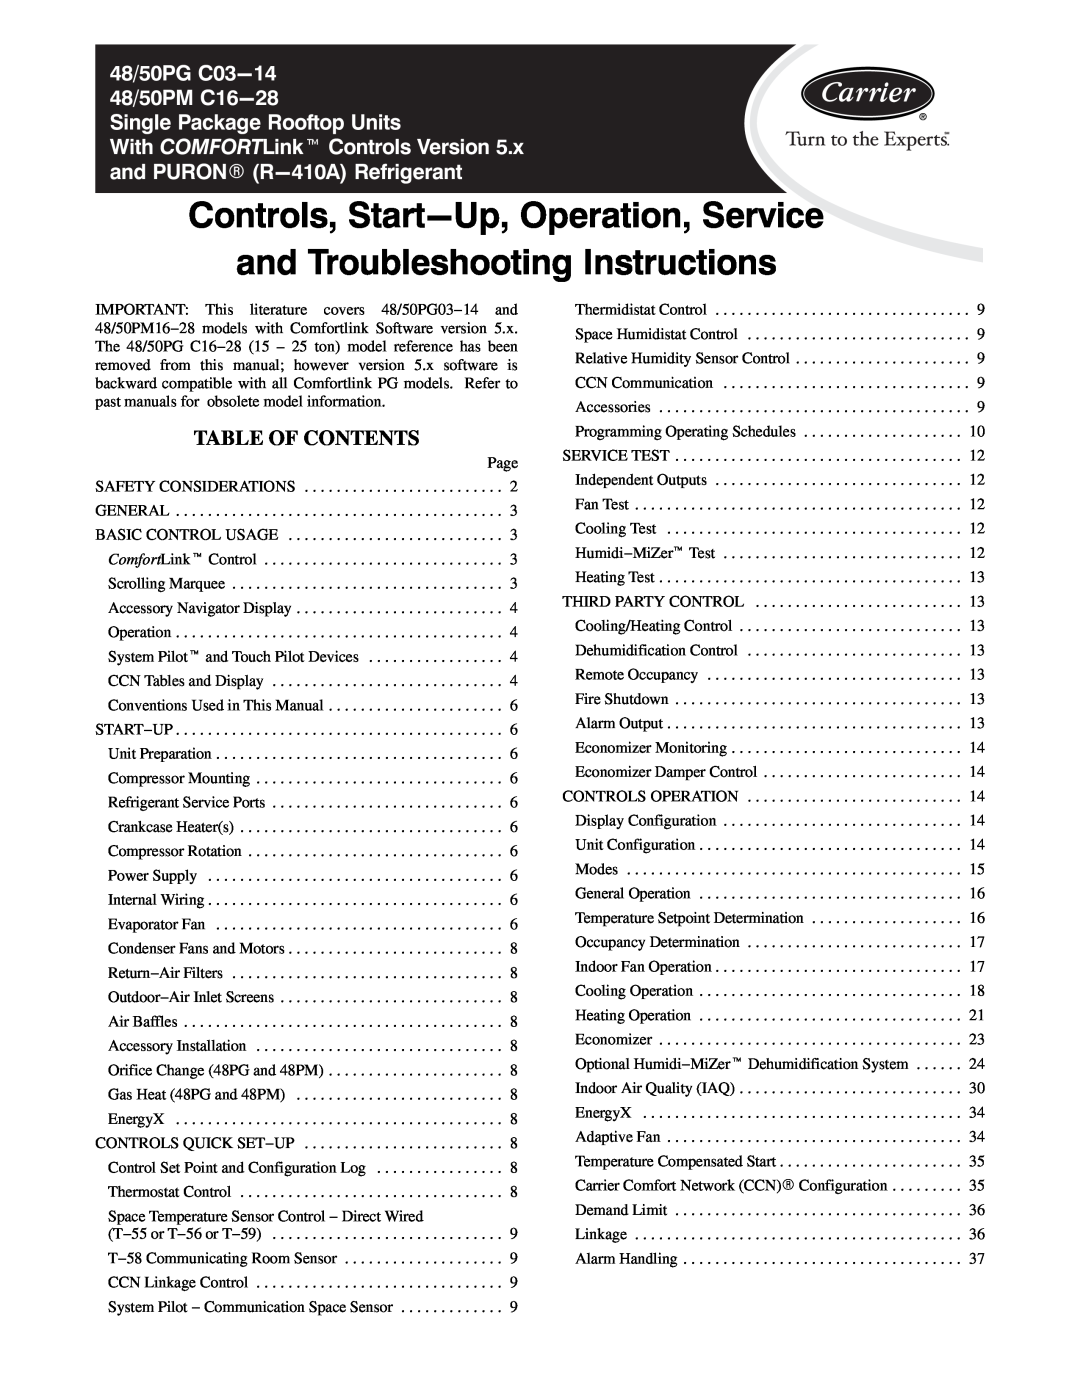 Carrier 48/50PM C16-28 manual Table Of Contents, Controls, Start-Up,Operation, Service, and Troubleshooting Instructions 